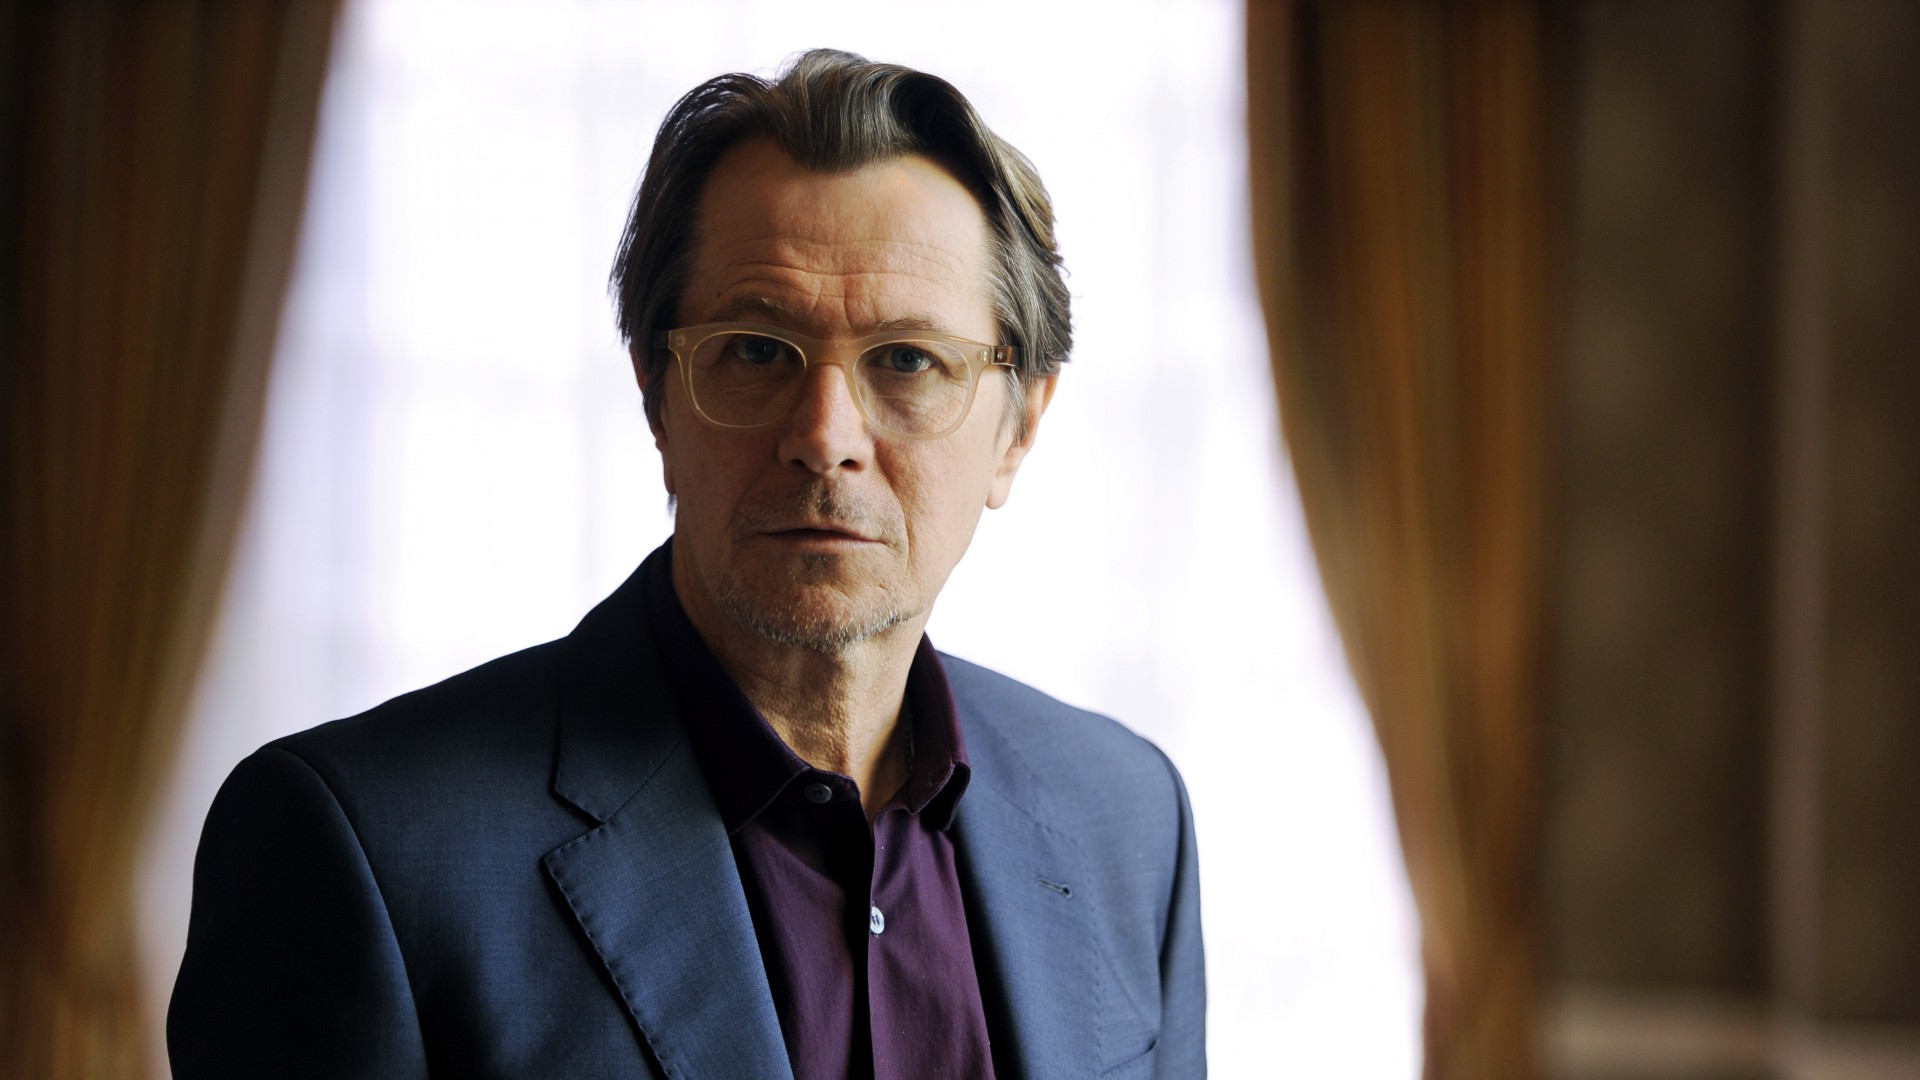 Gary Oldman, Most Popular Celebs in 2015, actor, Child 44, Man Down, Criminal, Dawn of the Planet of the Apes (horizontal)